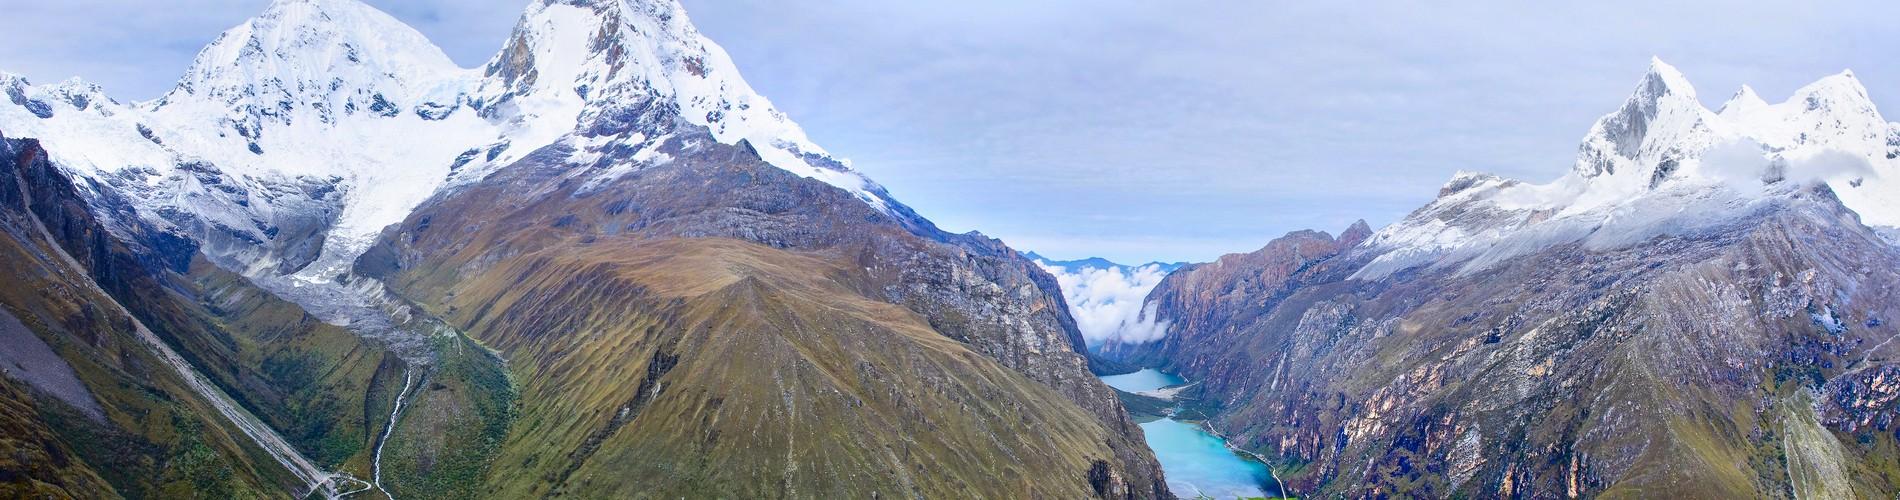 Where to hike in Peru this year!